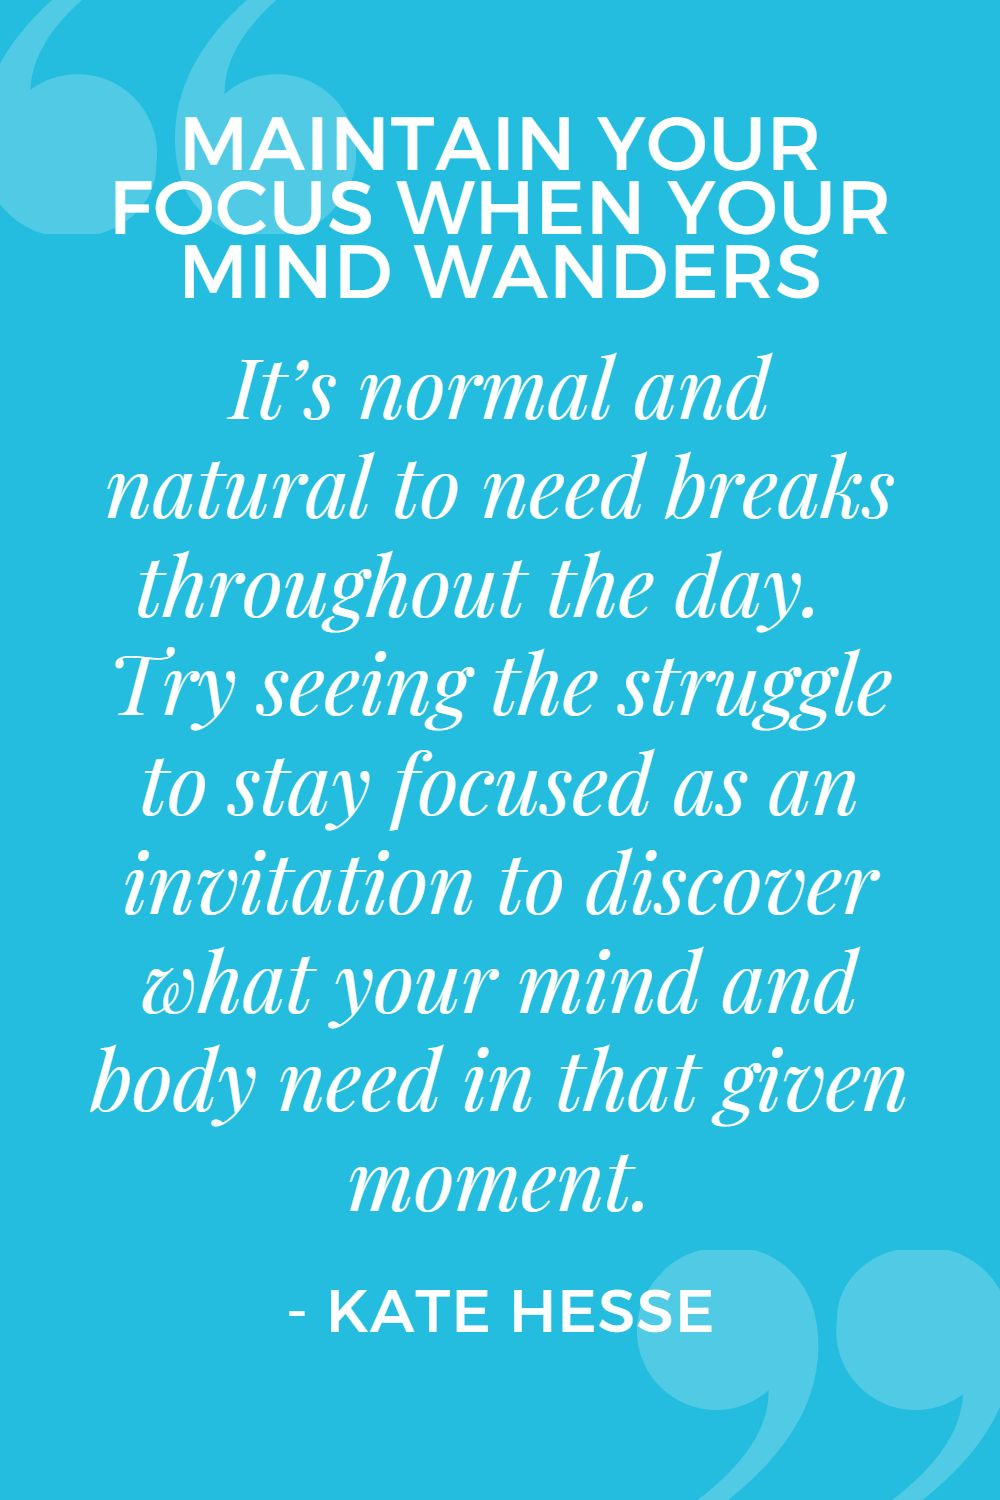 It's normal and natural to need breaks throughout the day. Try seeing the struggle to stay focused as an invitation to discover what your mind and body need in that given moment.